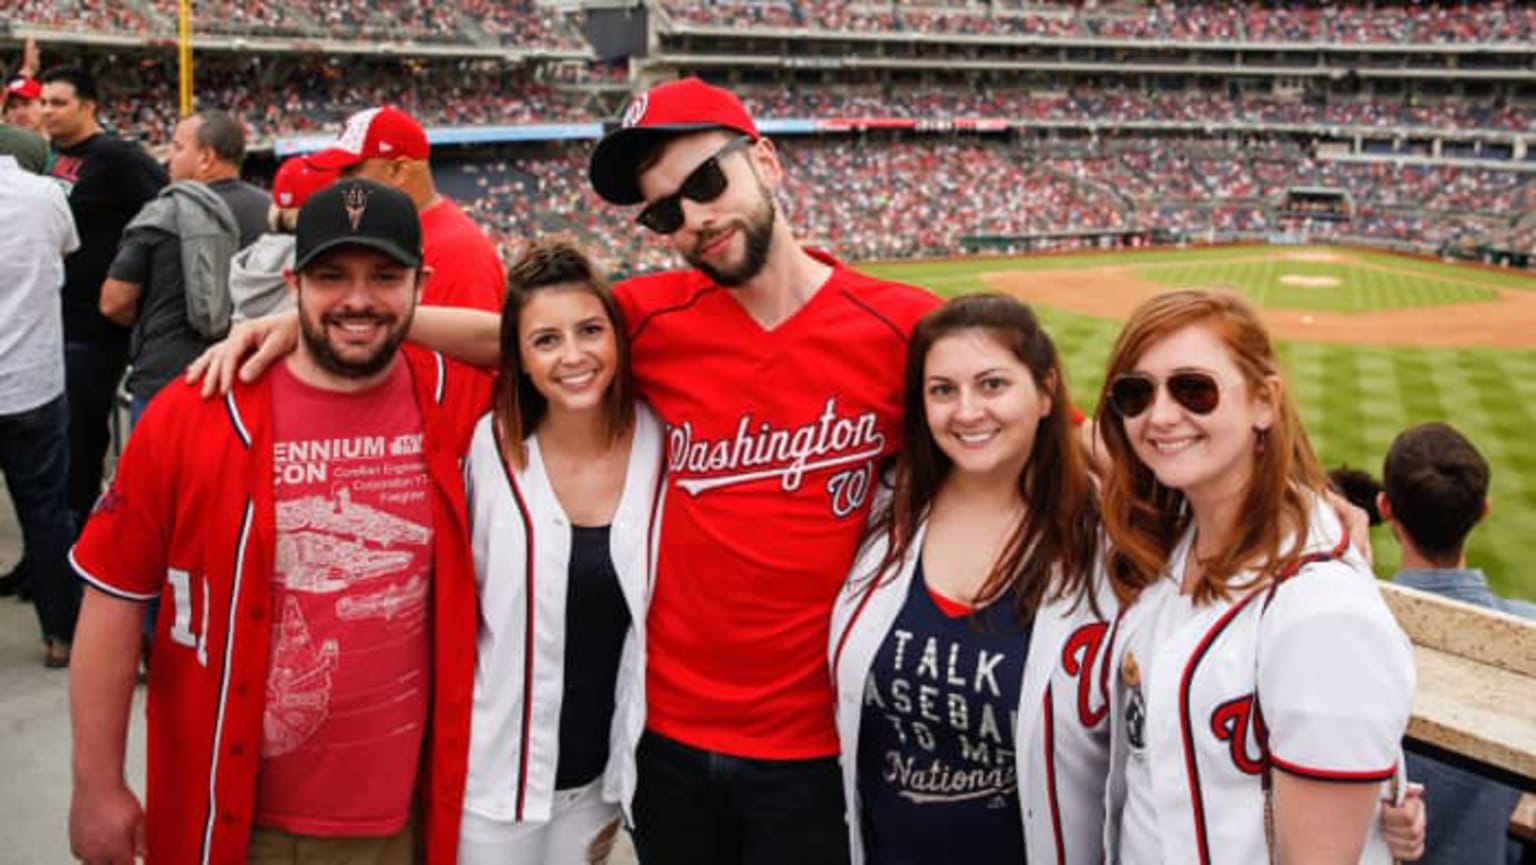 Fans line up at Nats Park for cherry blossom jerseys - WTOP News